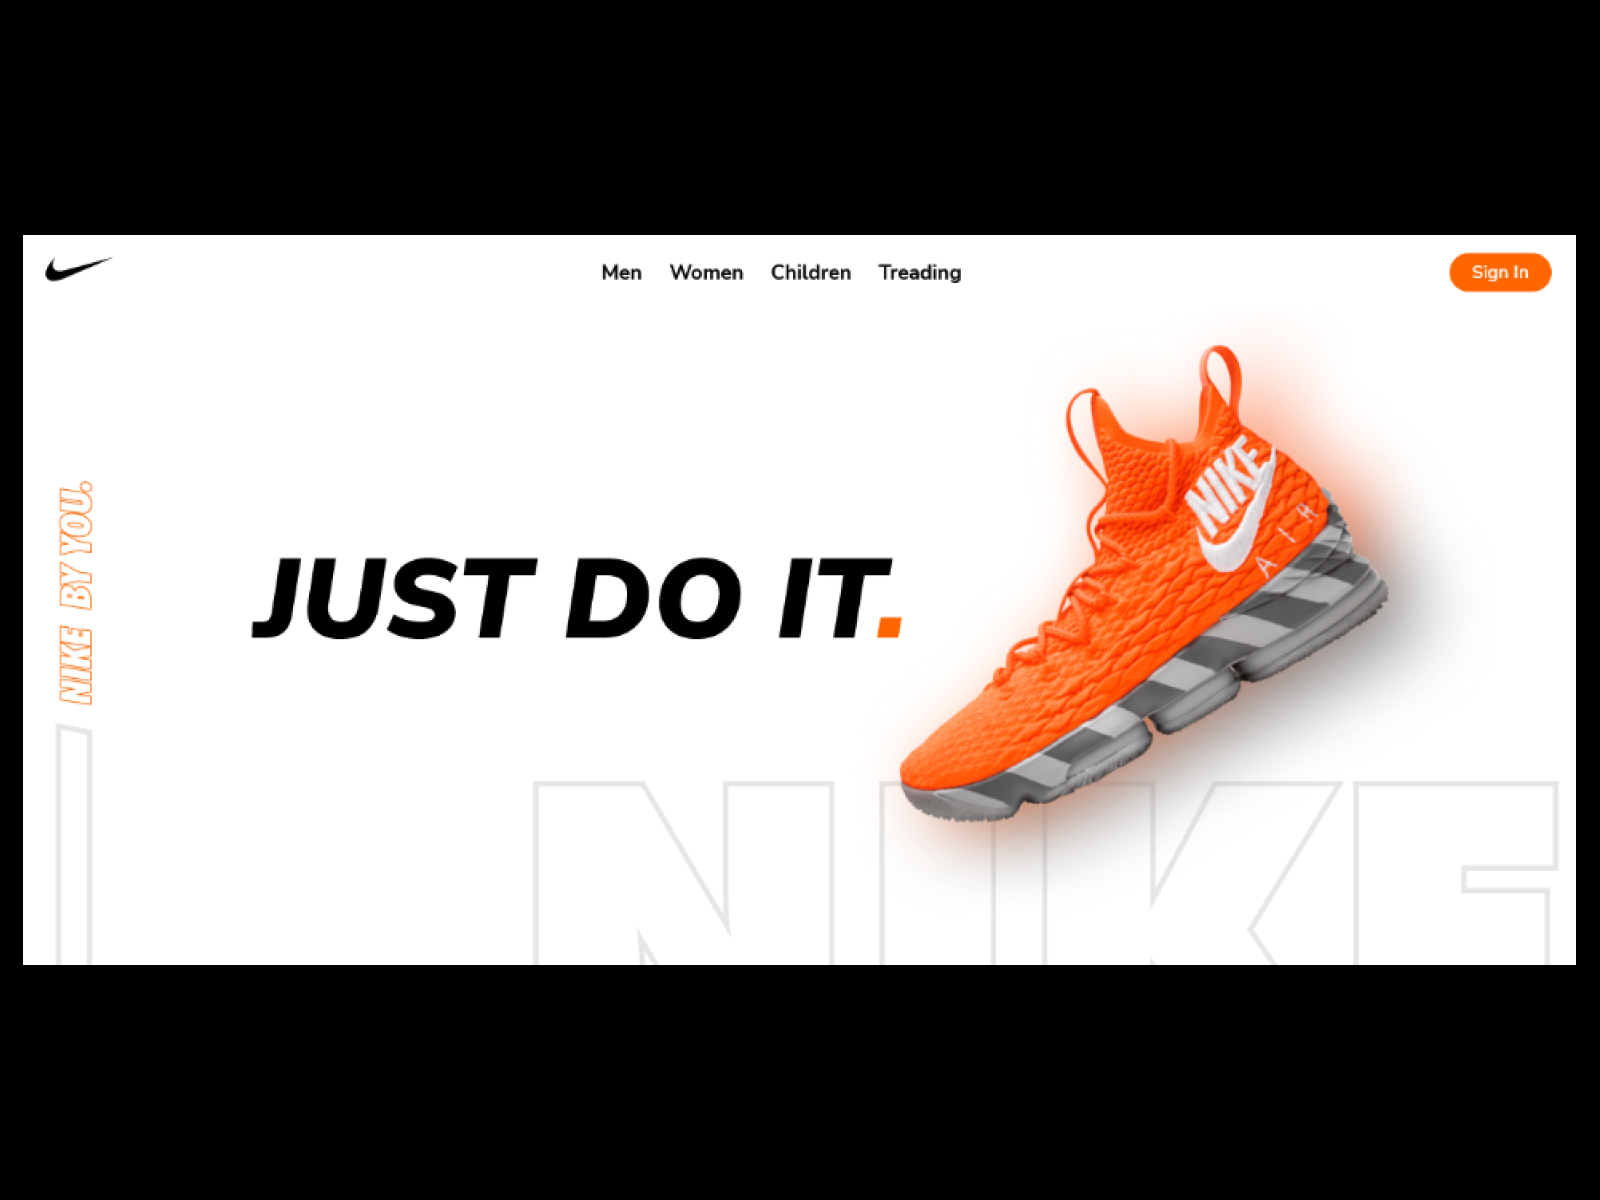 Replicated NIKE webpage using HTML/CSS by MOULIVIKRAM K G on Dribbble